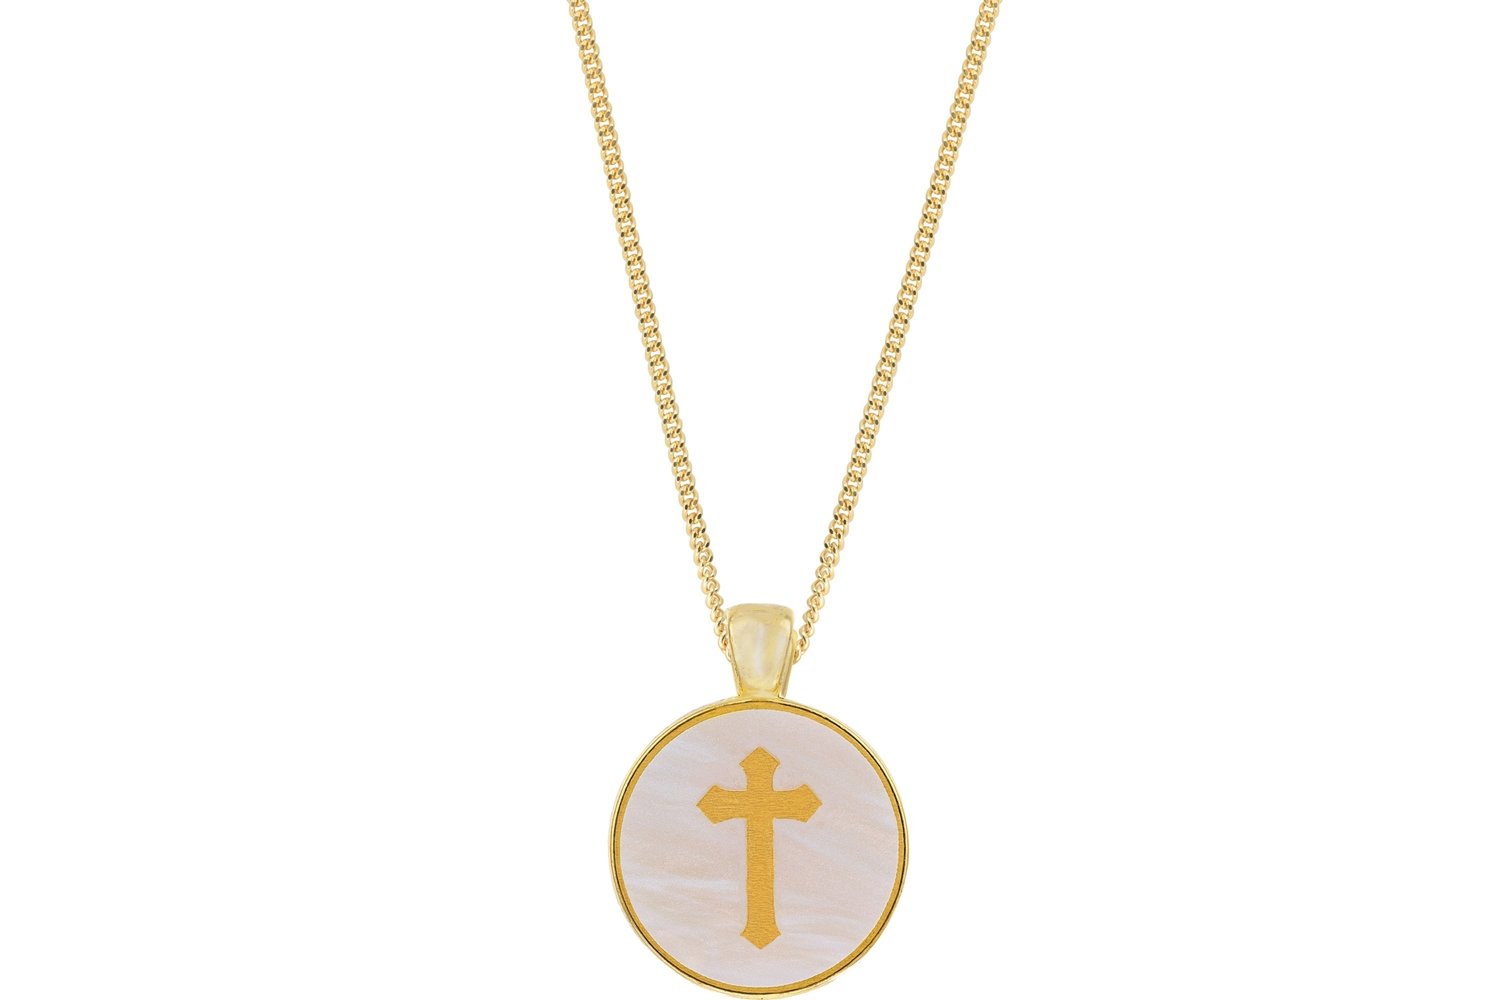 Cross Pendant Classic Style with Bezel on Chain Necklace